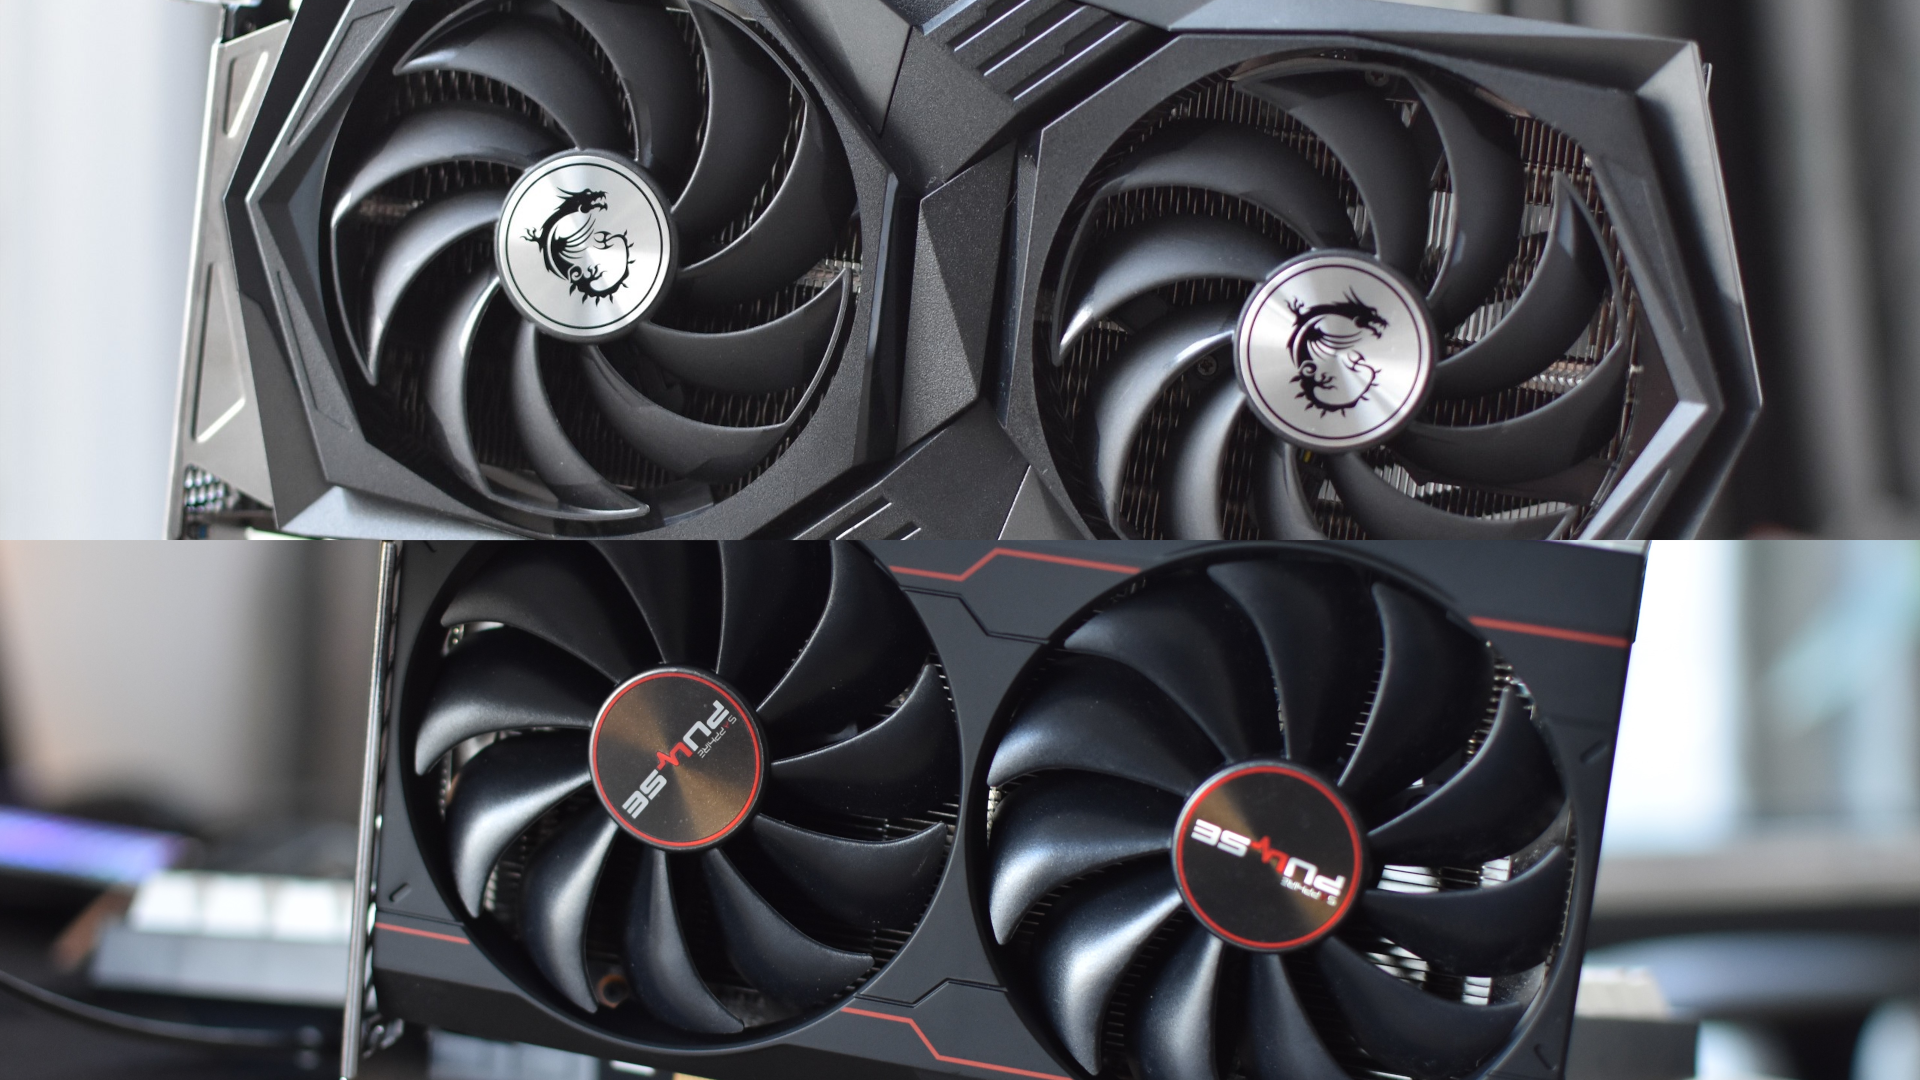 A composite image showing both the Nvidia GeForce RTX 3050 and AMD Radeon RX 6500 XT graphics cards.